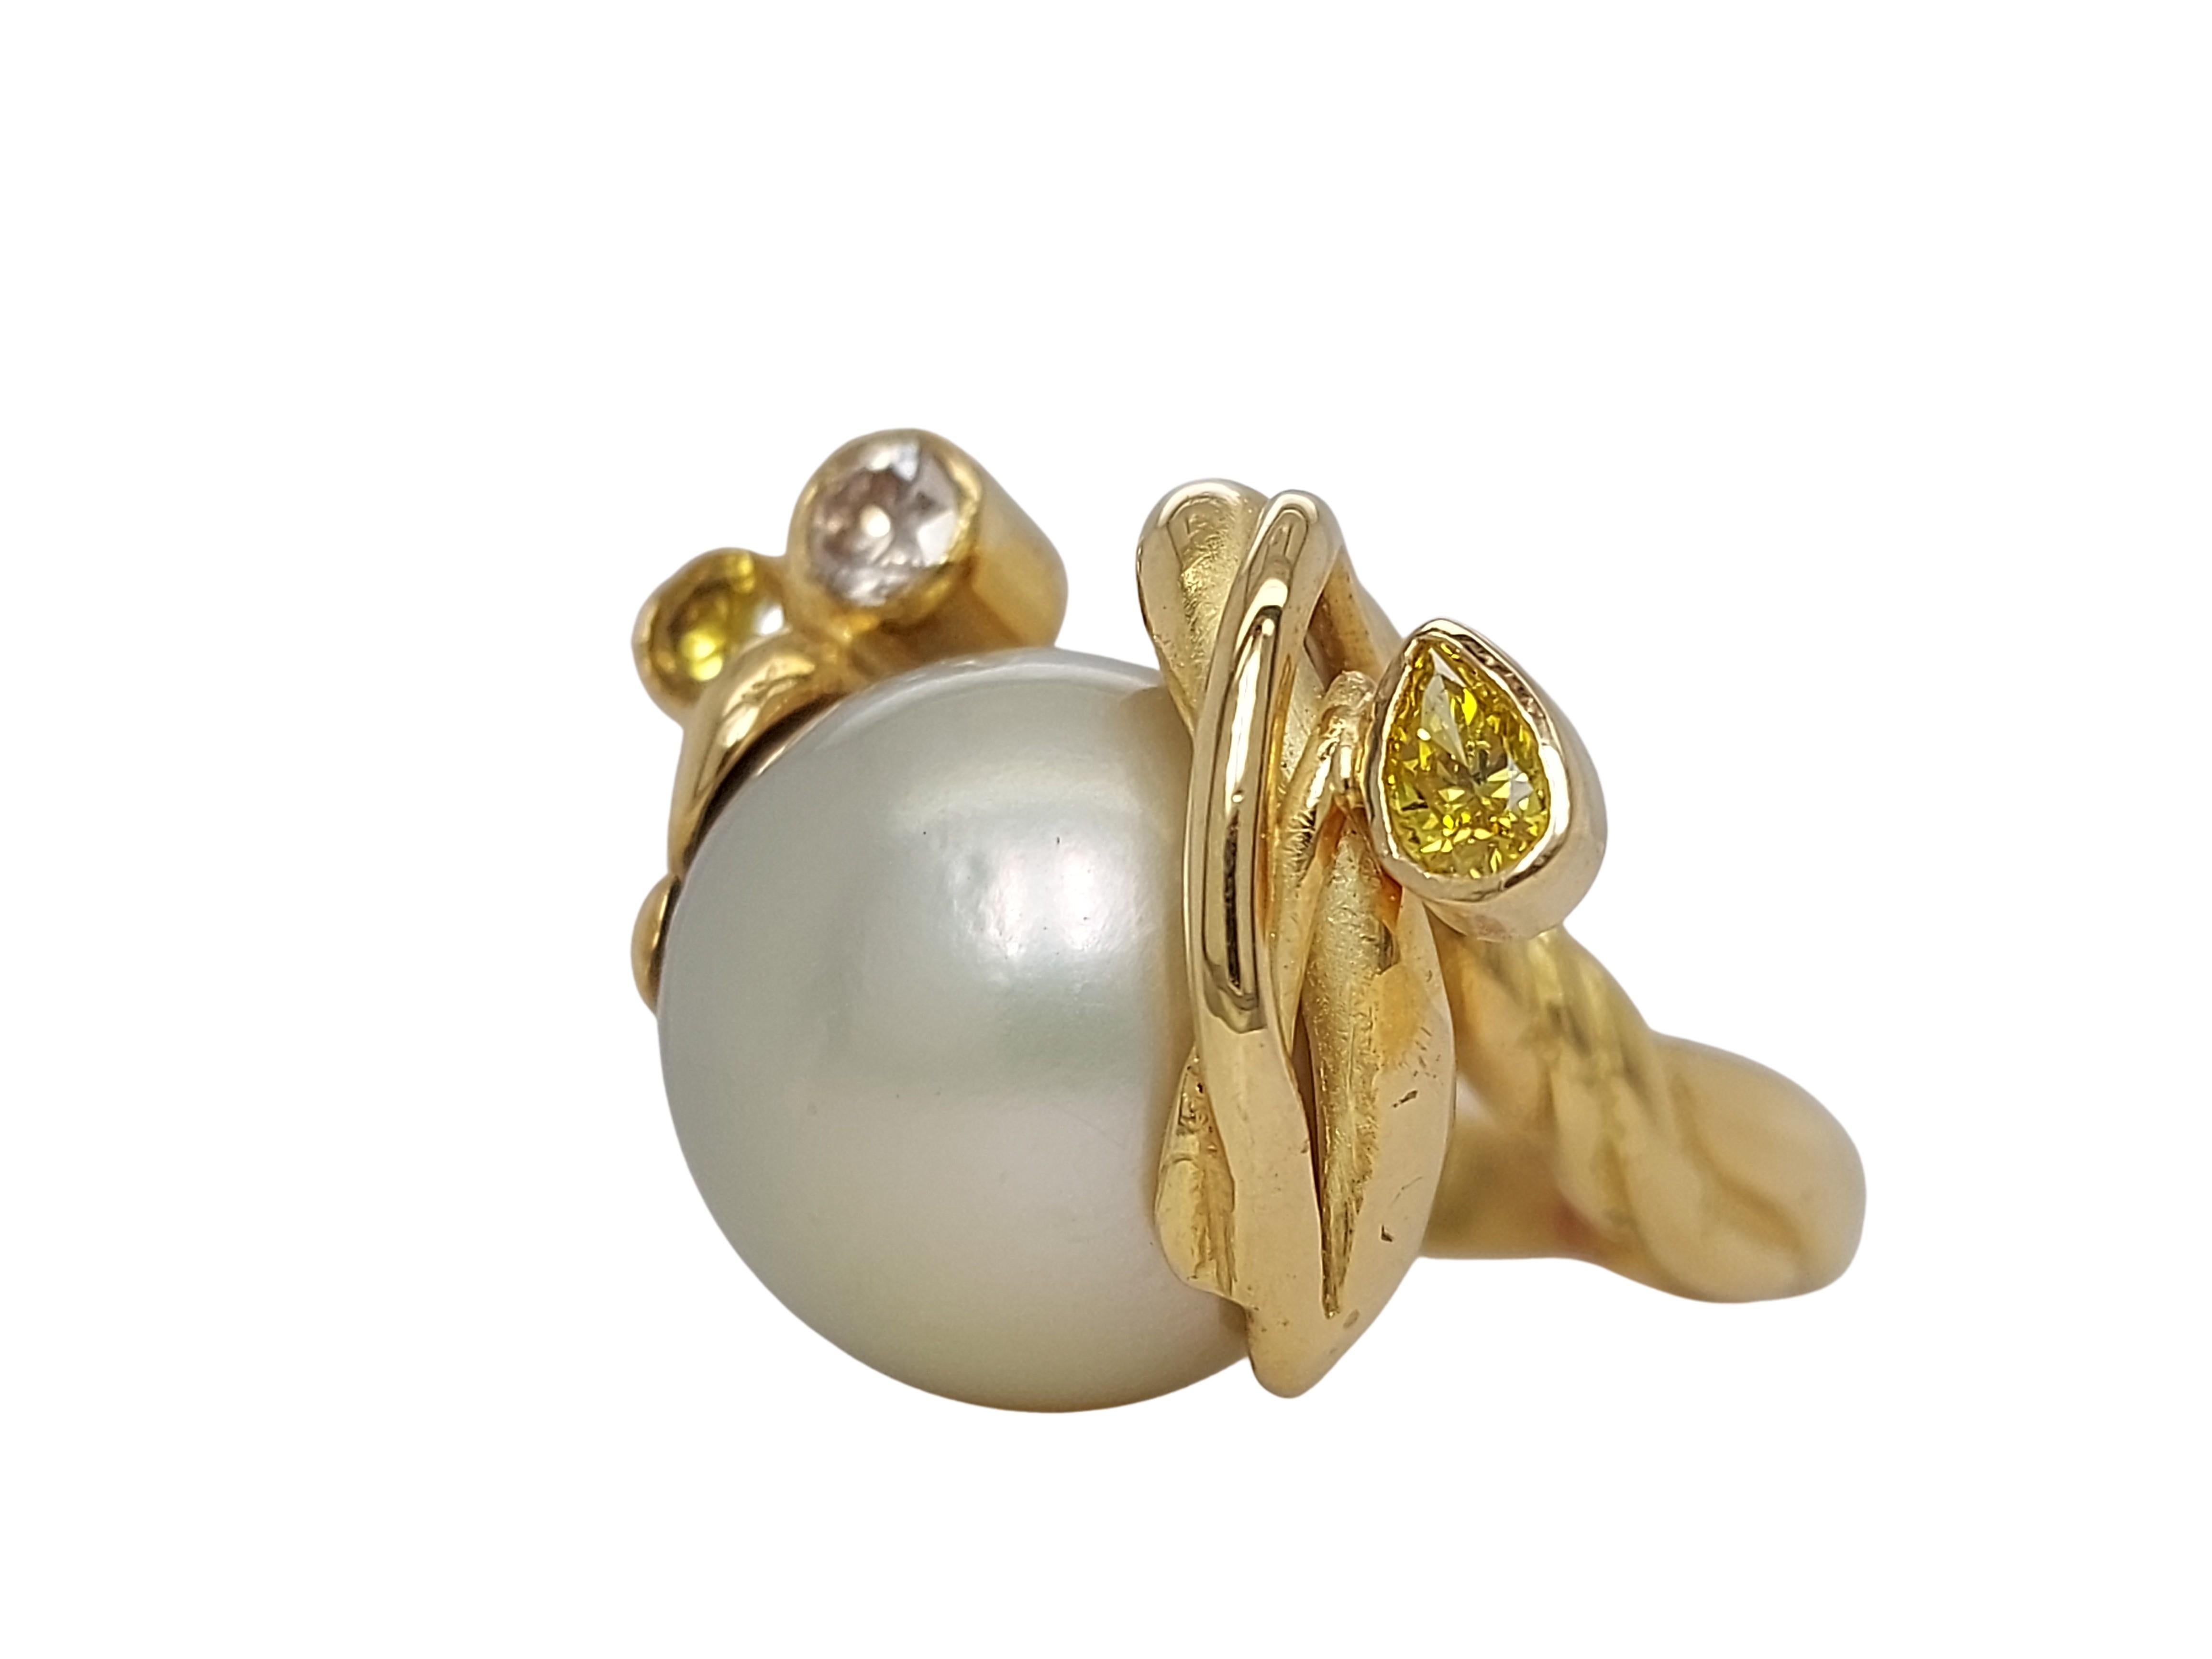 18kt Yellow Gold Ring With Beautiful South Sea Pearl and Diamonds By Jean Pierre De Saedeleer.

One of a kind Jean Pierre De Saedeleer hand crafted ring.

Only one piece made which makes it so unique !

Diamonds: together ca. 0.63ct 

Pearl: 15